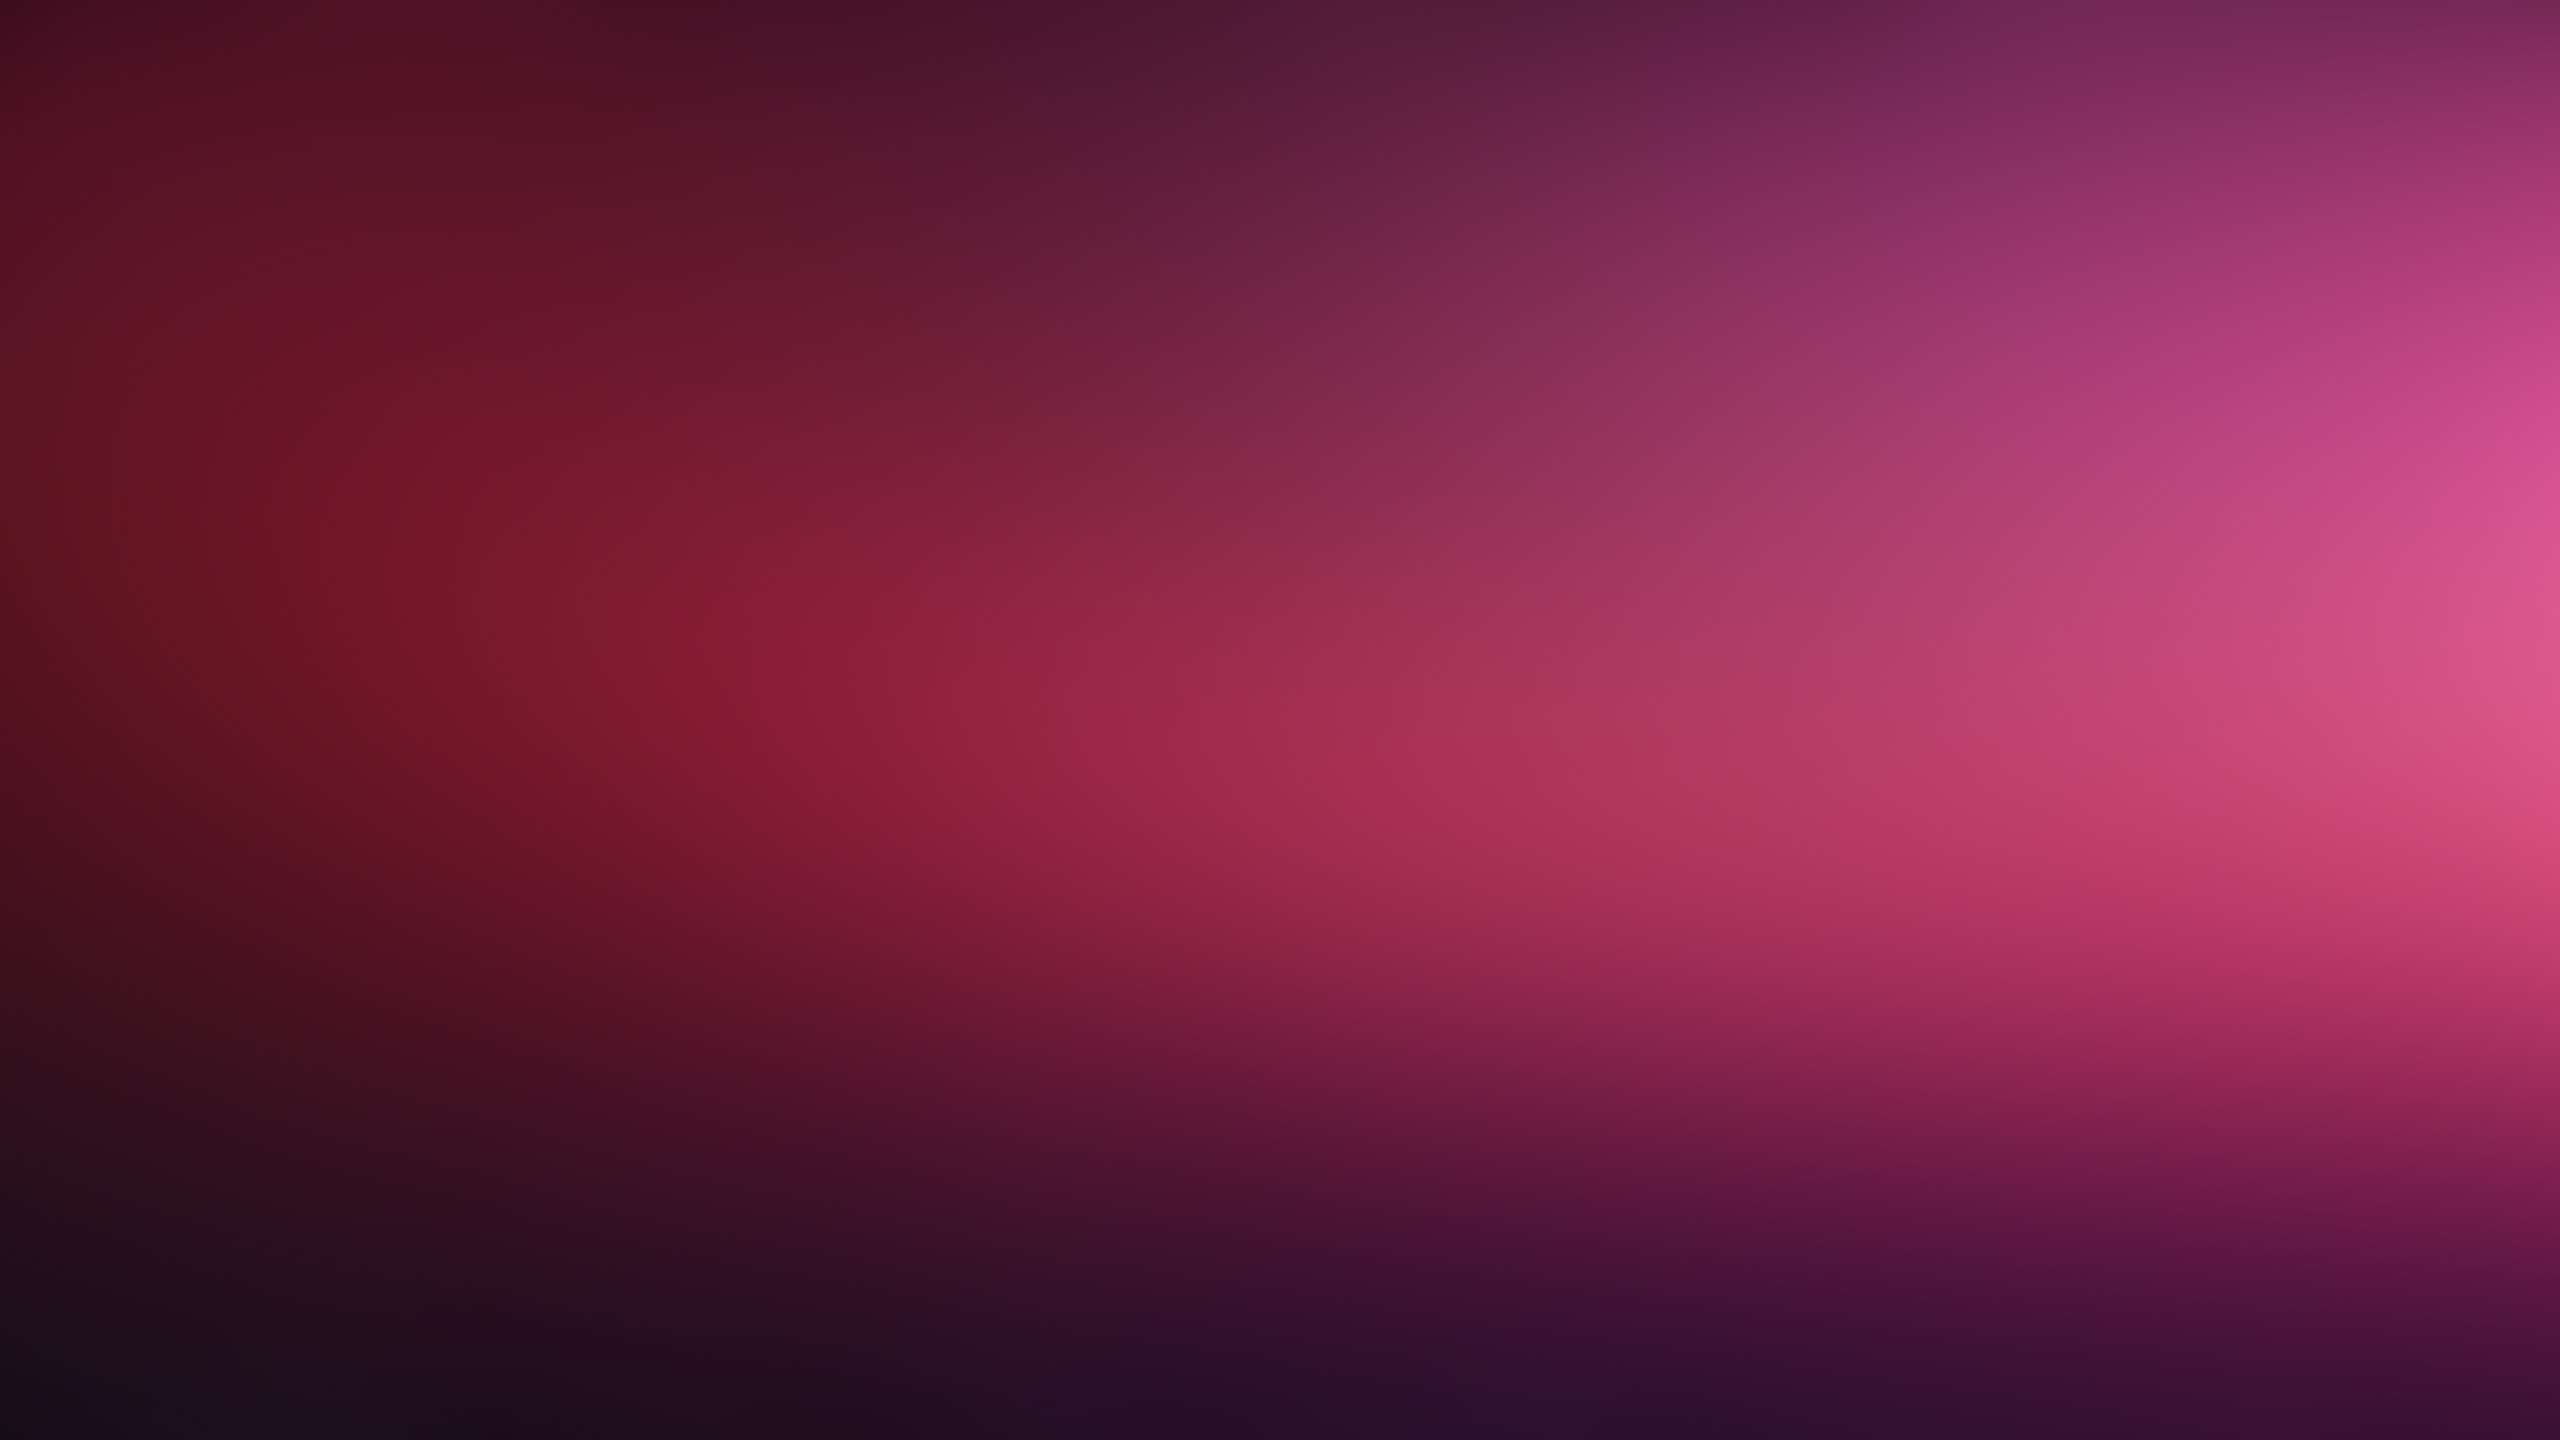 2K Abstract Wallpapers, bordo background.